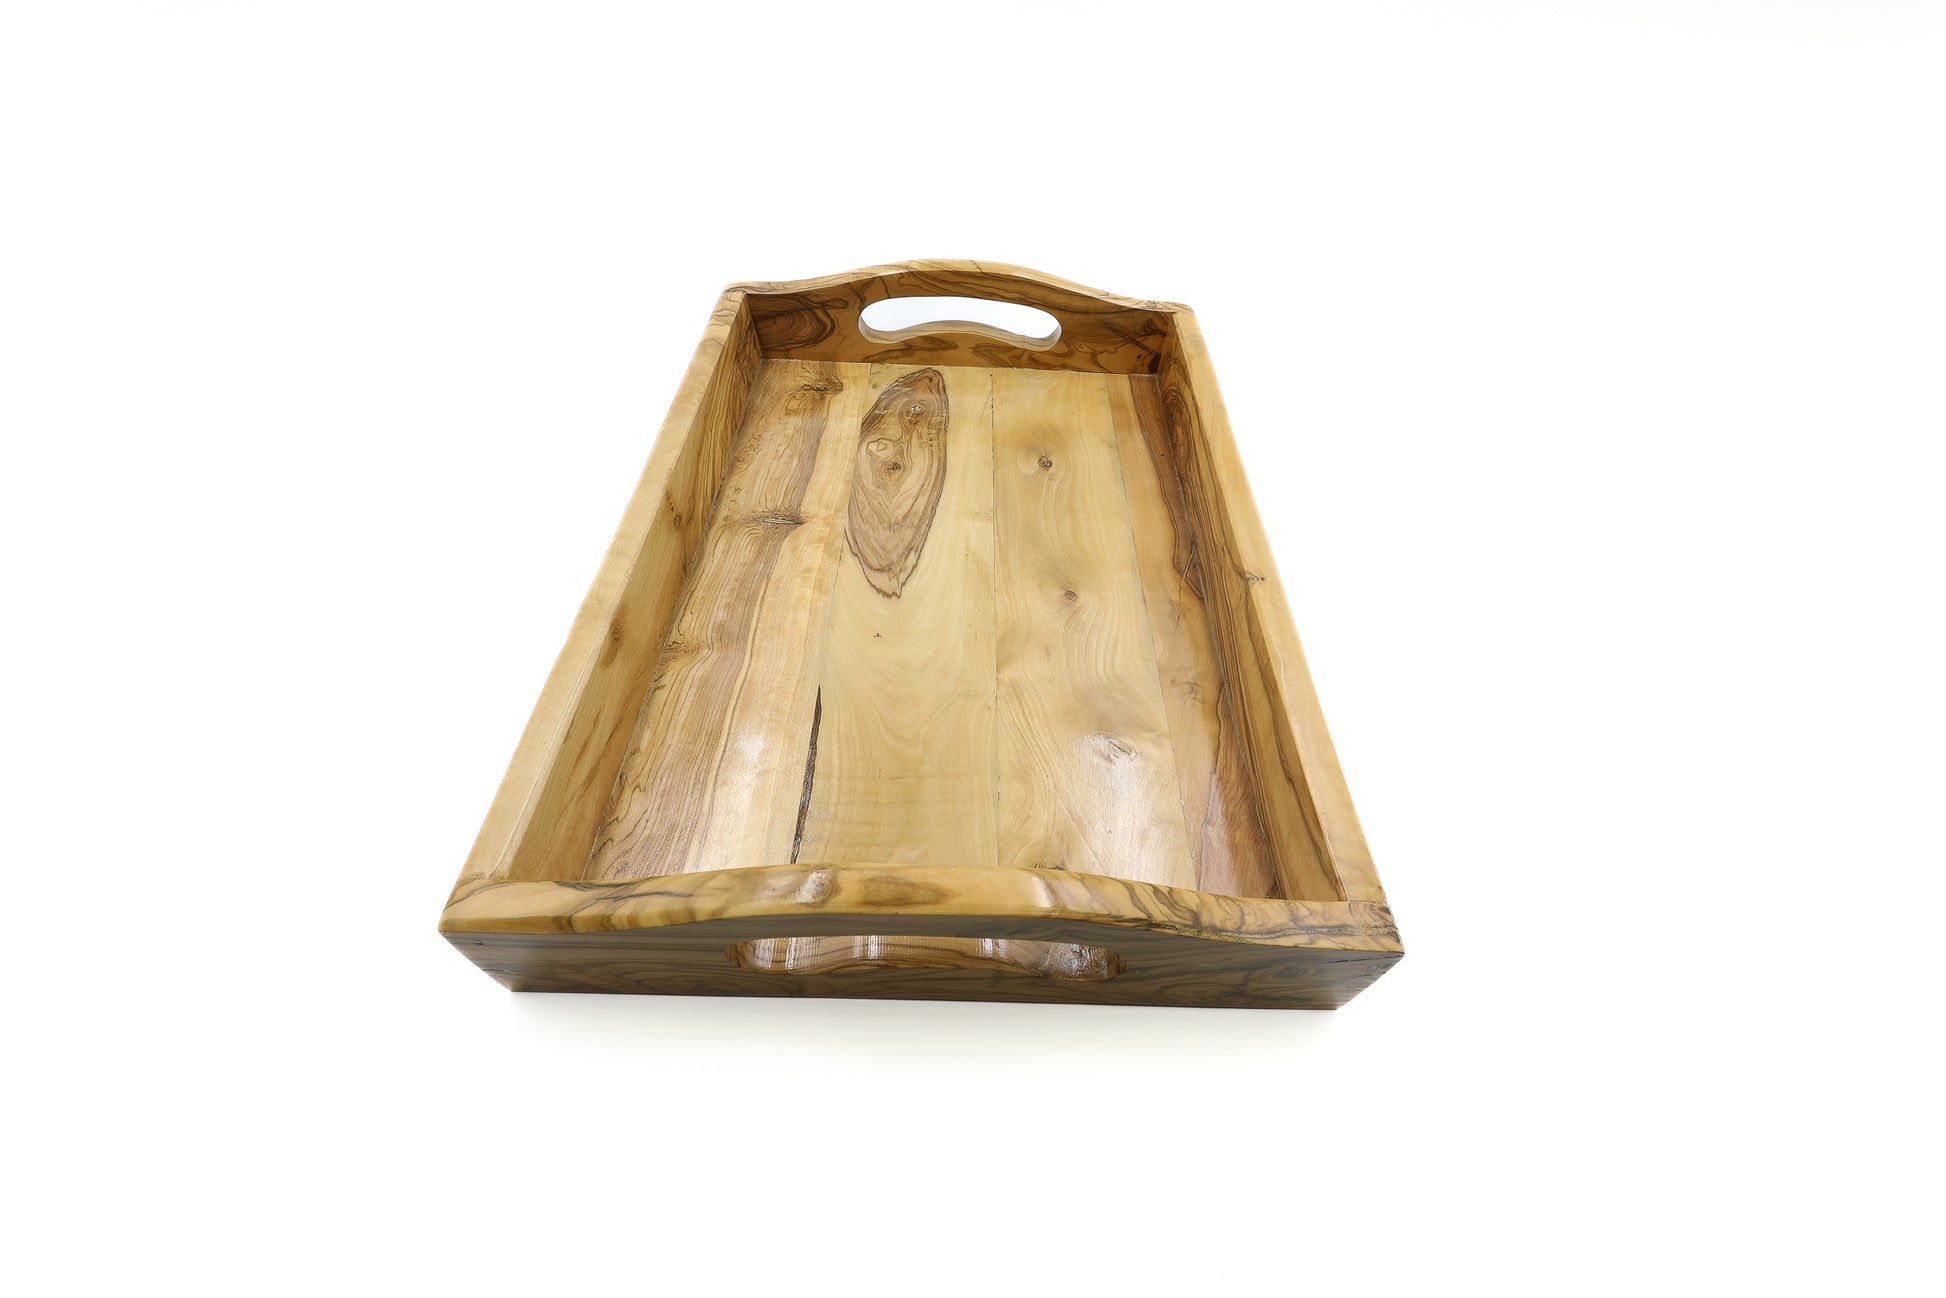 Stylish Olive Wood Serving Tray: Rectangular Design with Handy Handles